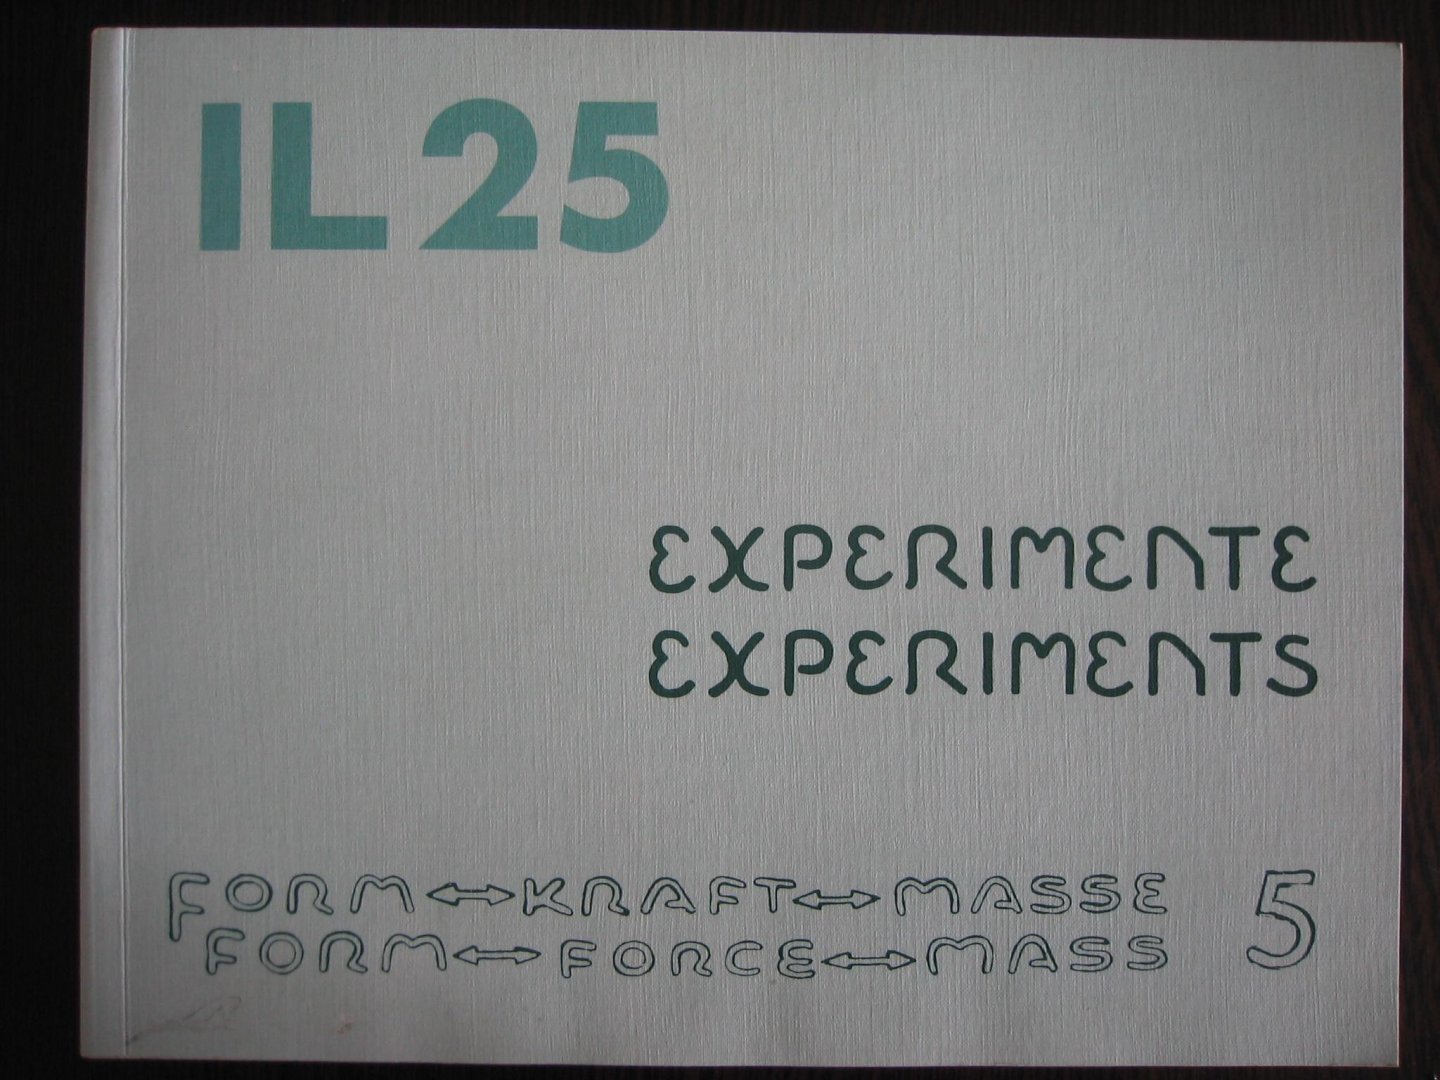 Siegfried Gass - Experimente - Experiments - IL 25